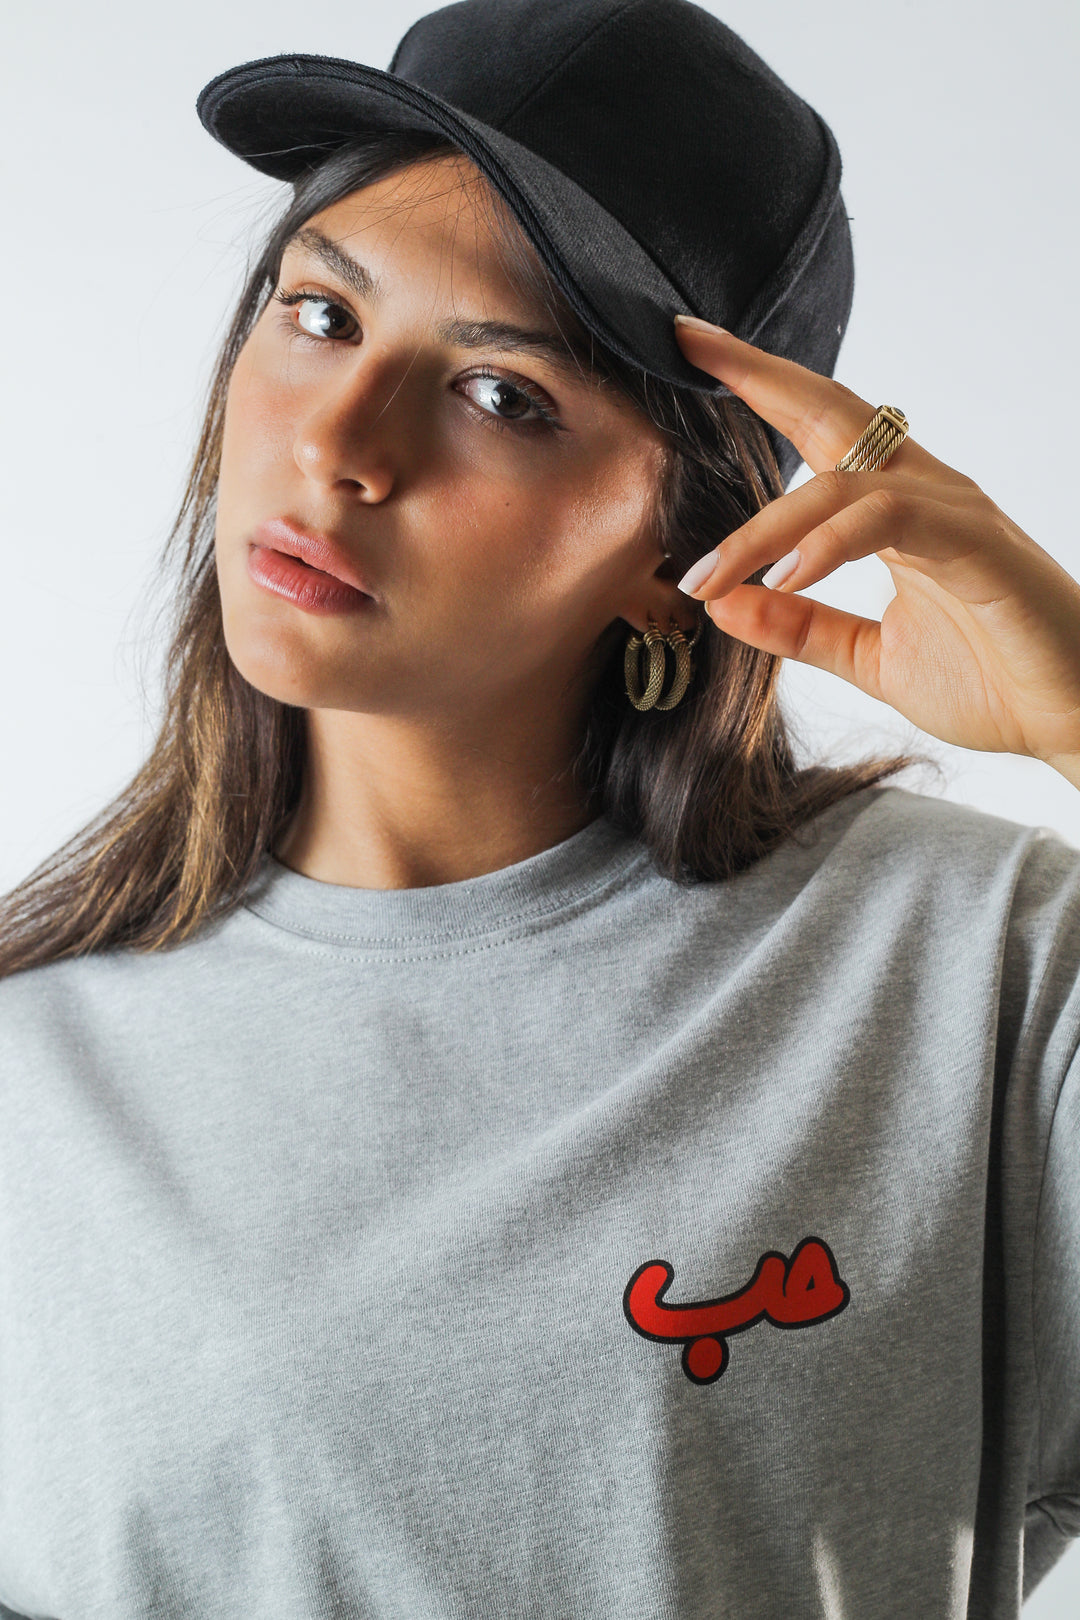 Young adult female wearing an Oversized grey T-Dress with Hobb written in Arabic حب and printed in red silkscreen on the side of the dress along with a black cap on her head.